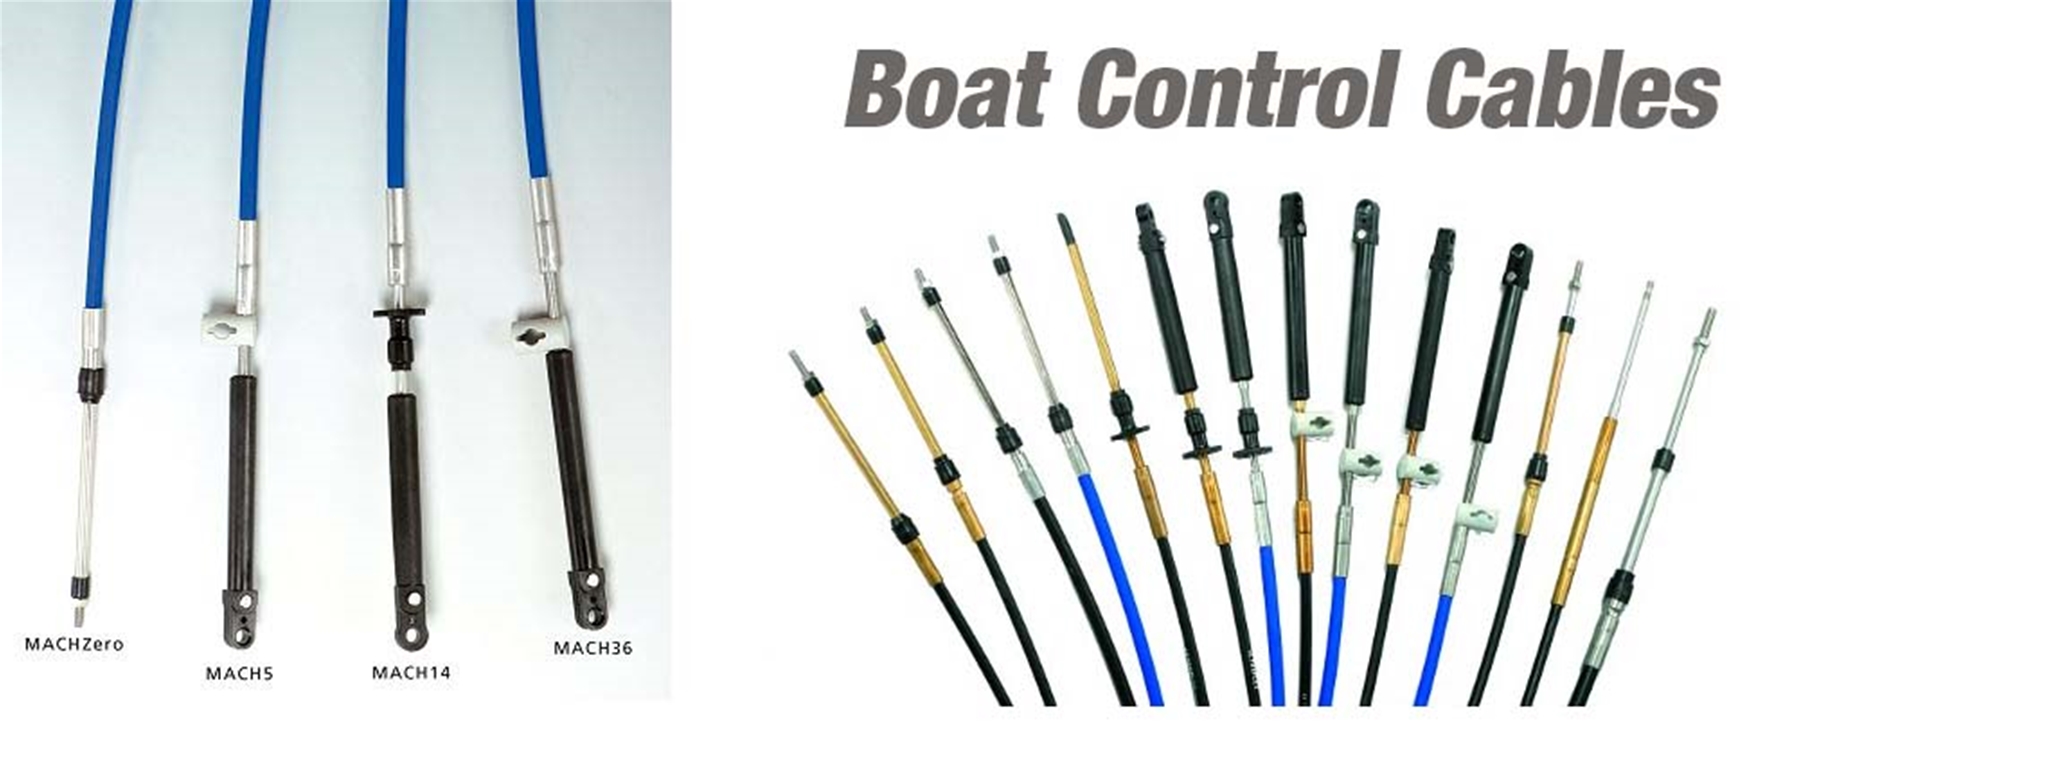 Boat Control Cables for throttle and shift making our boat moore easier to use. 